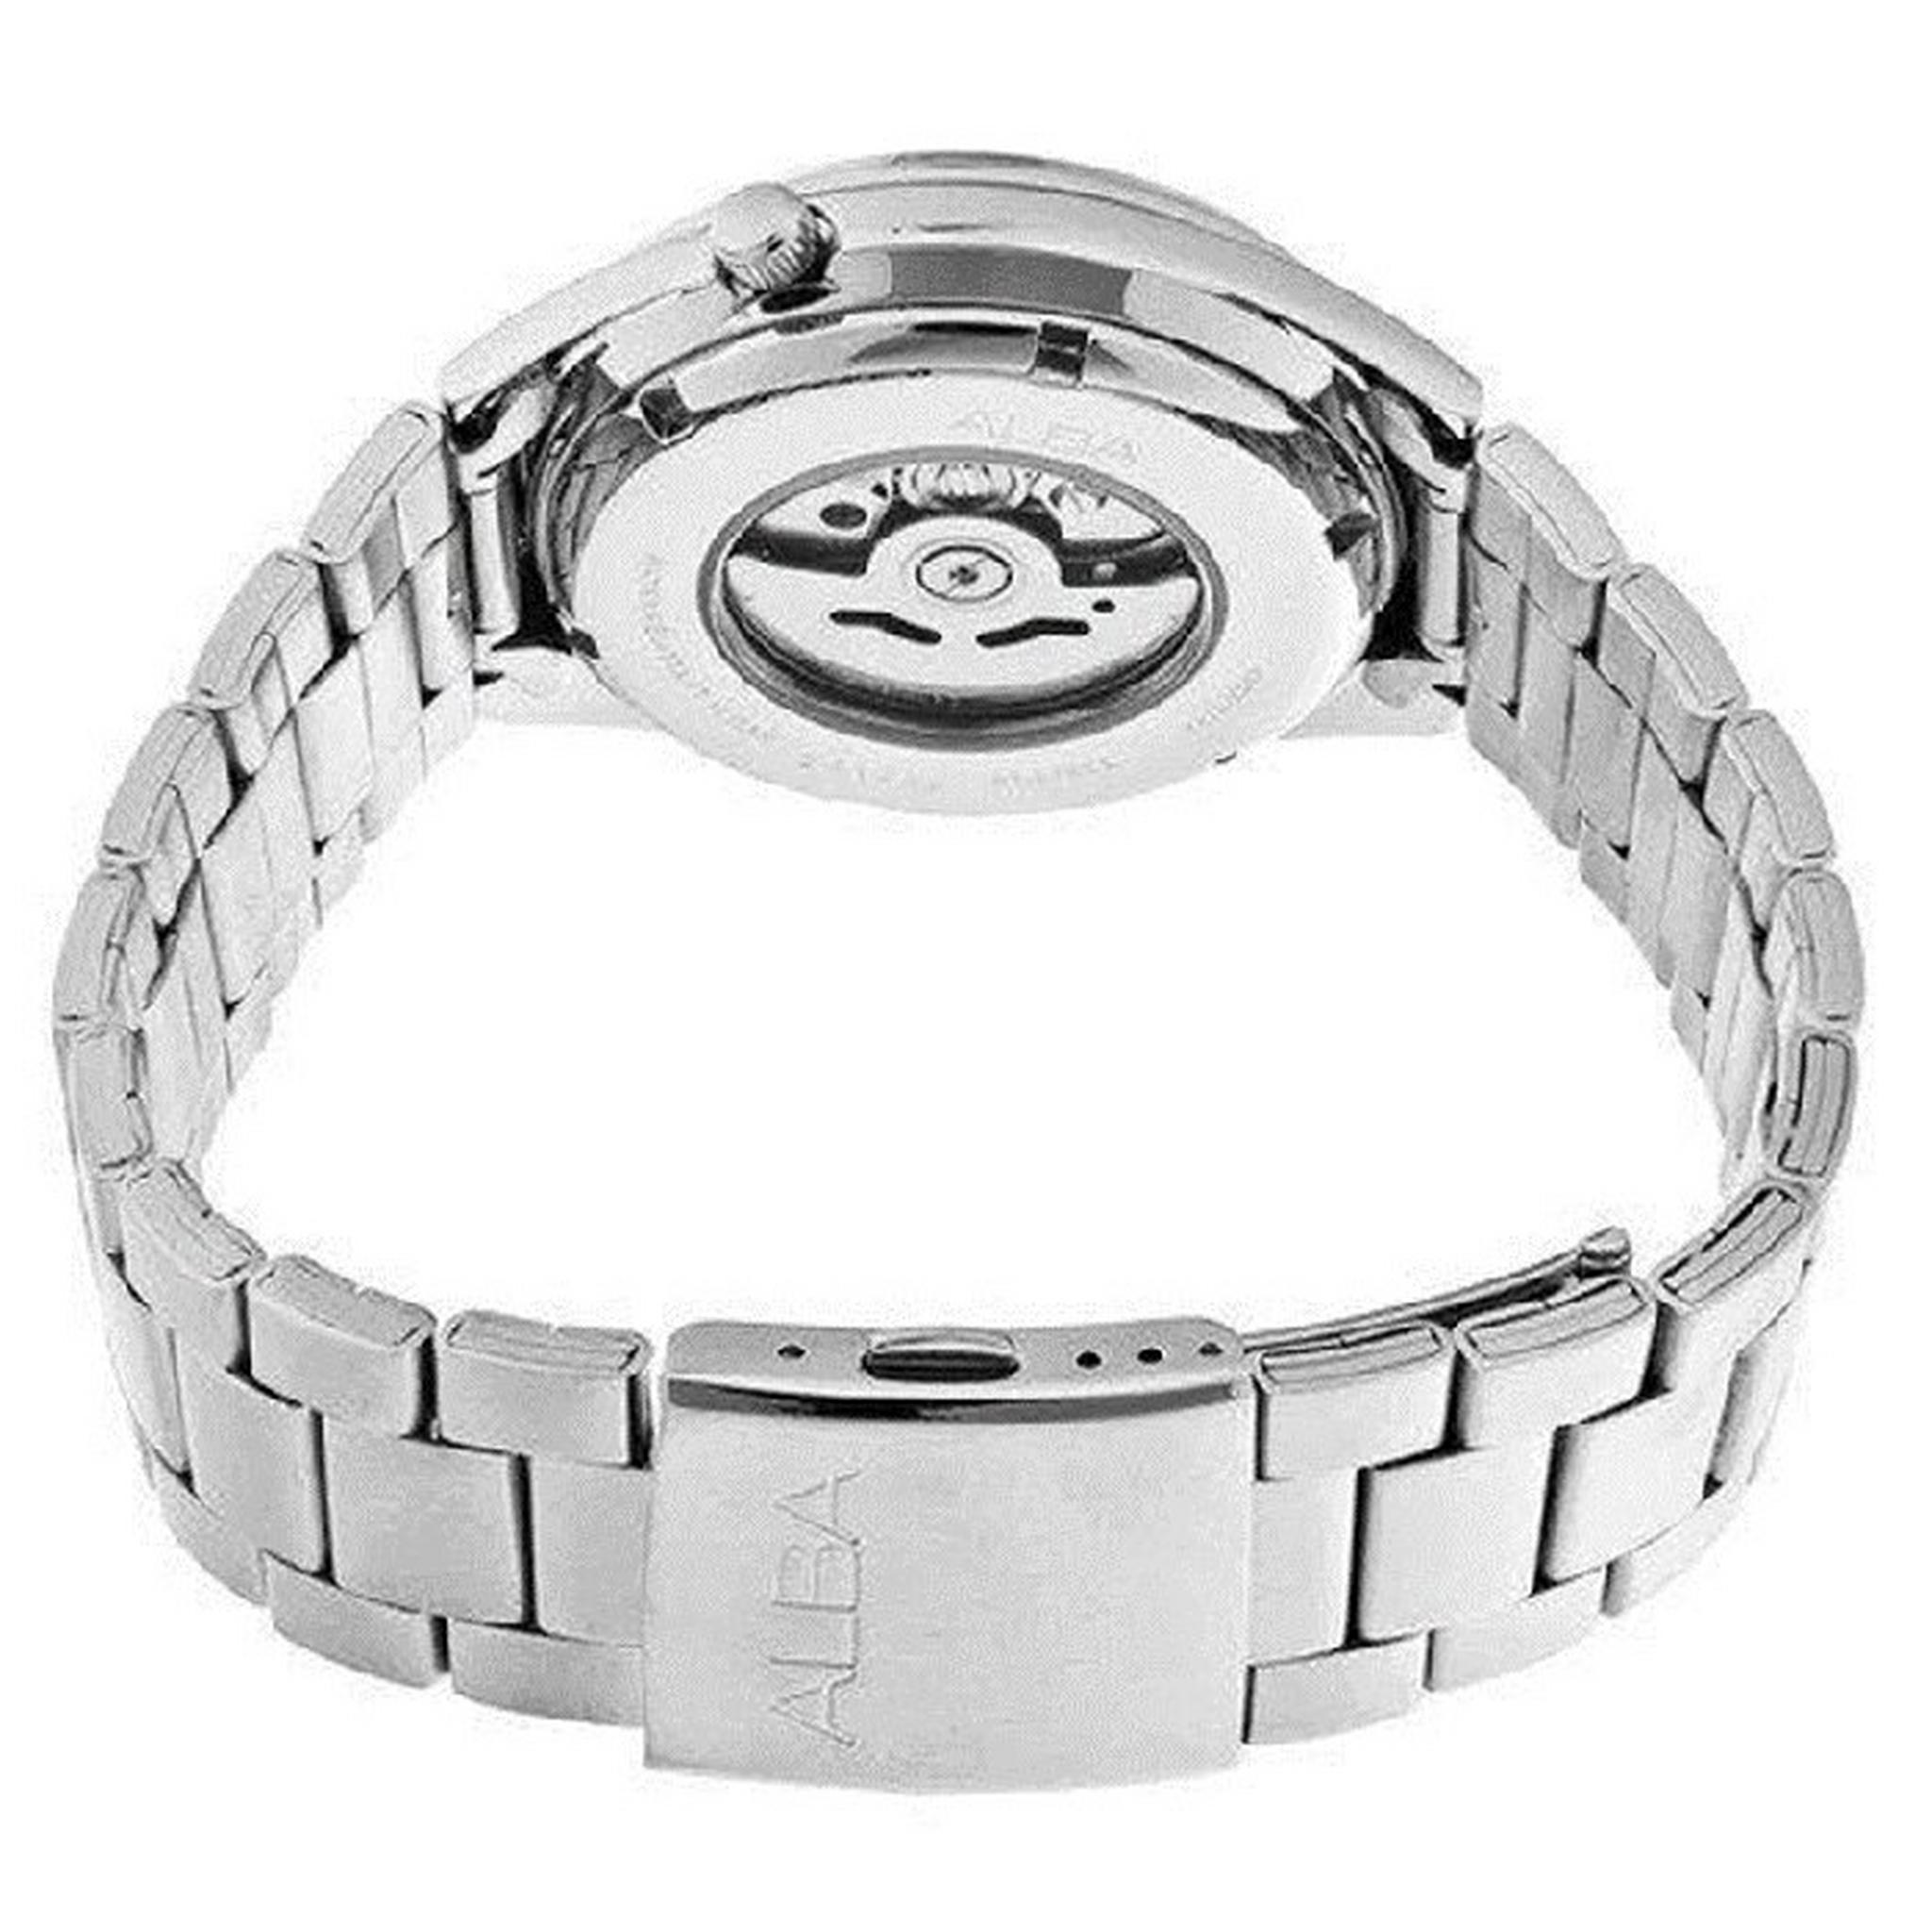 Alba Watch for Men, Analog, Stainless Steel, AL4317X1 - Silver